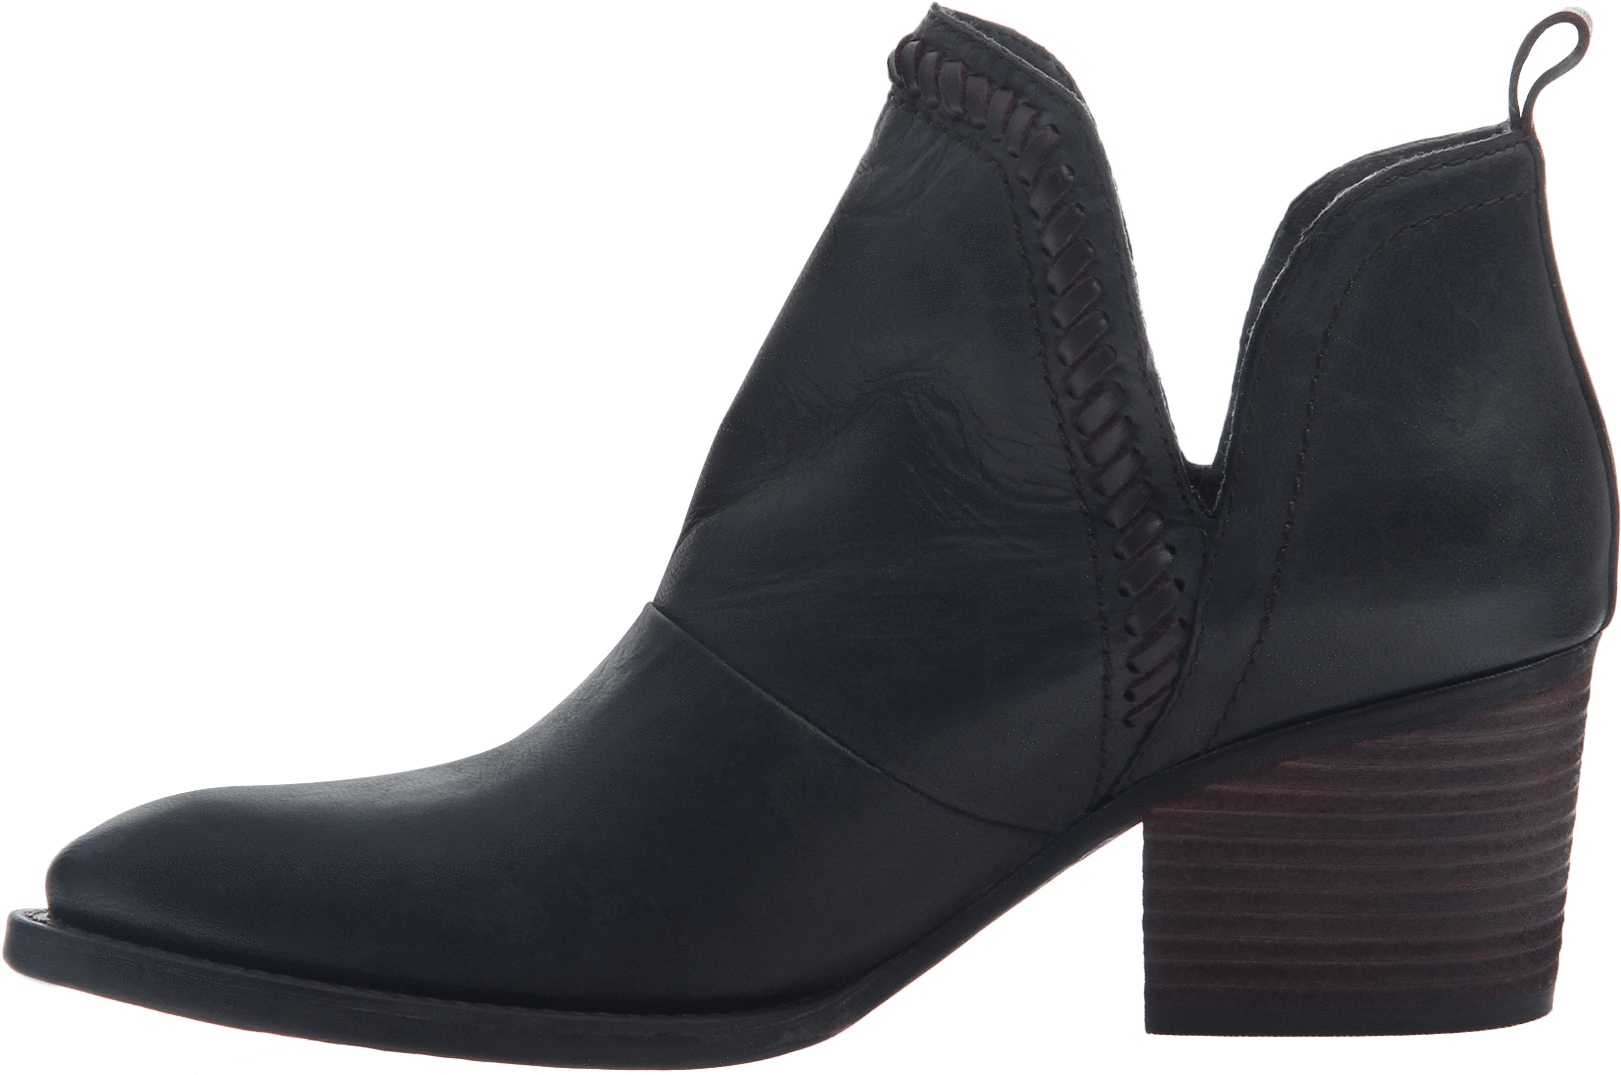 Women's Ankle Bootie The Venture In Black Inside View - Ankle (1782x1782)